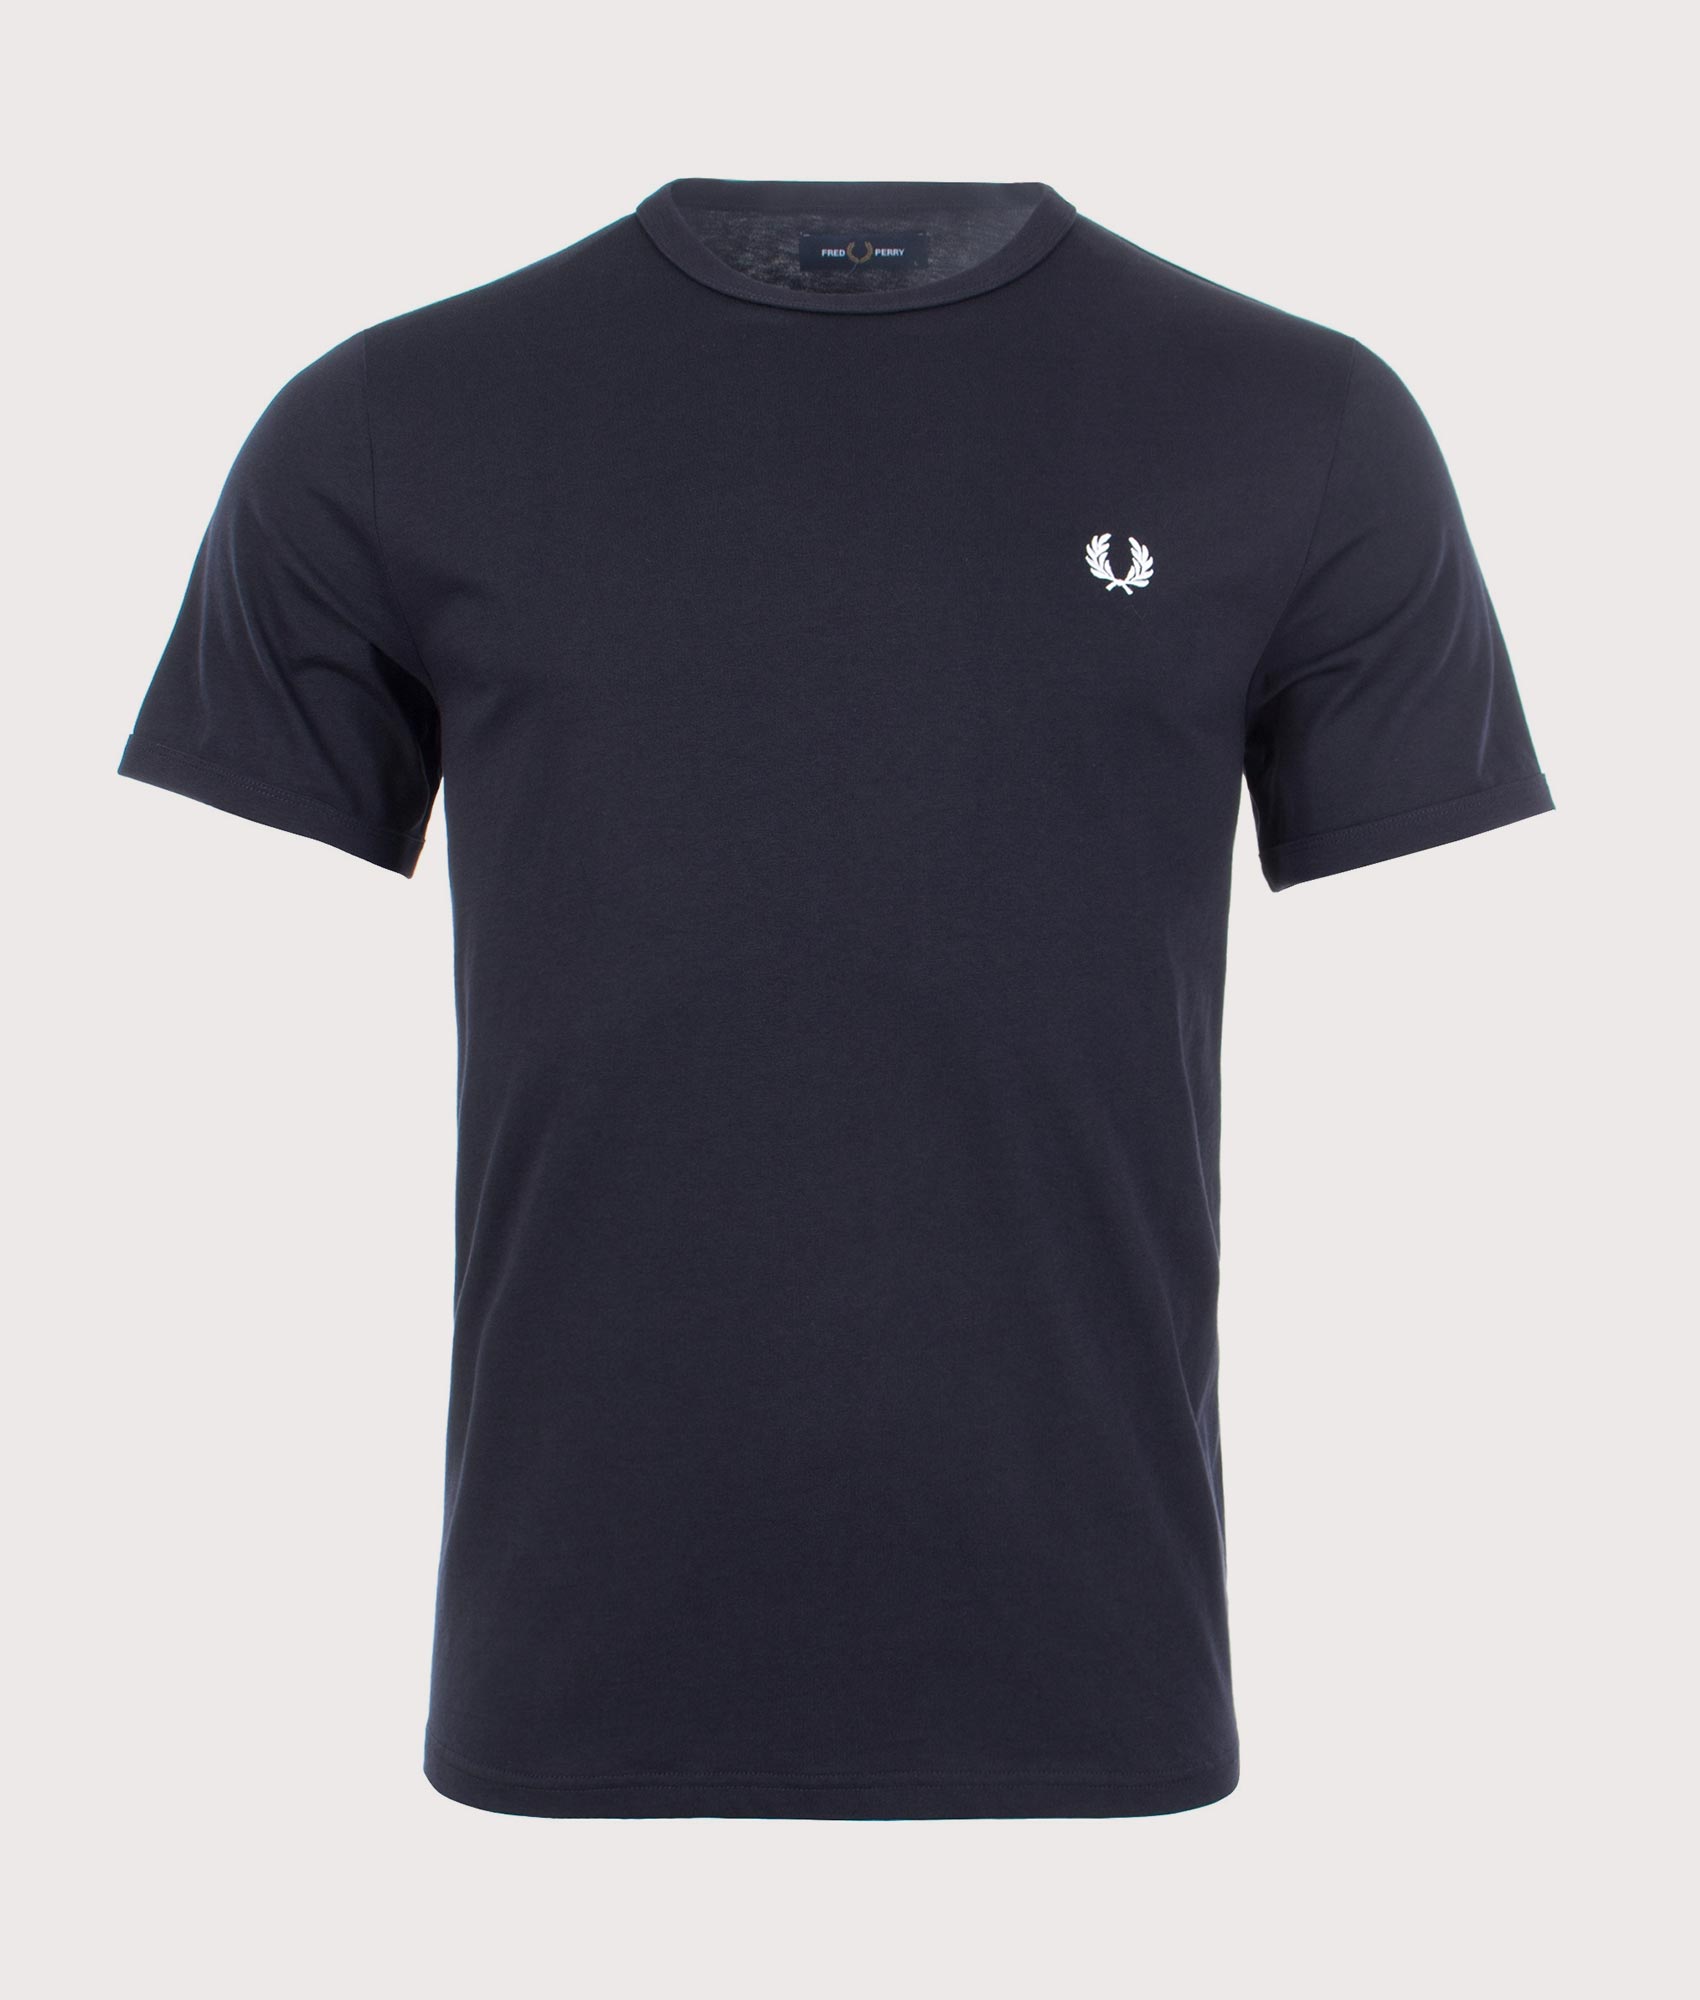 Fred Perry Mens Ringer T-Shirt - Colour: Core 608 Navy - Size: XXL